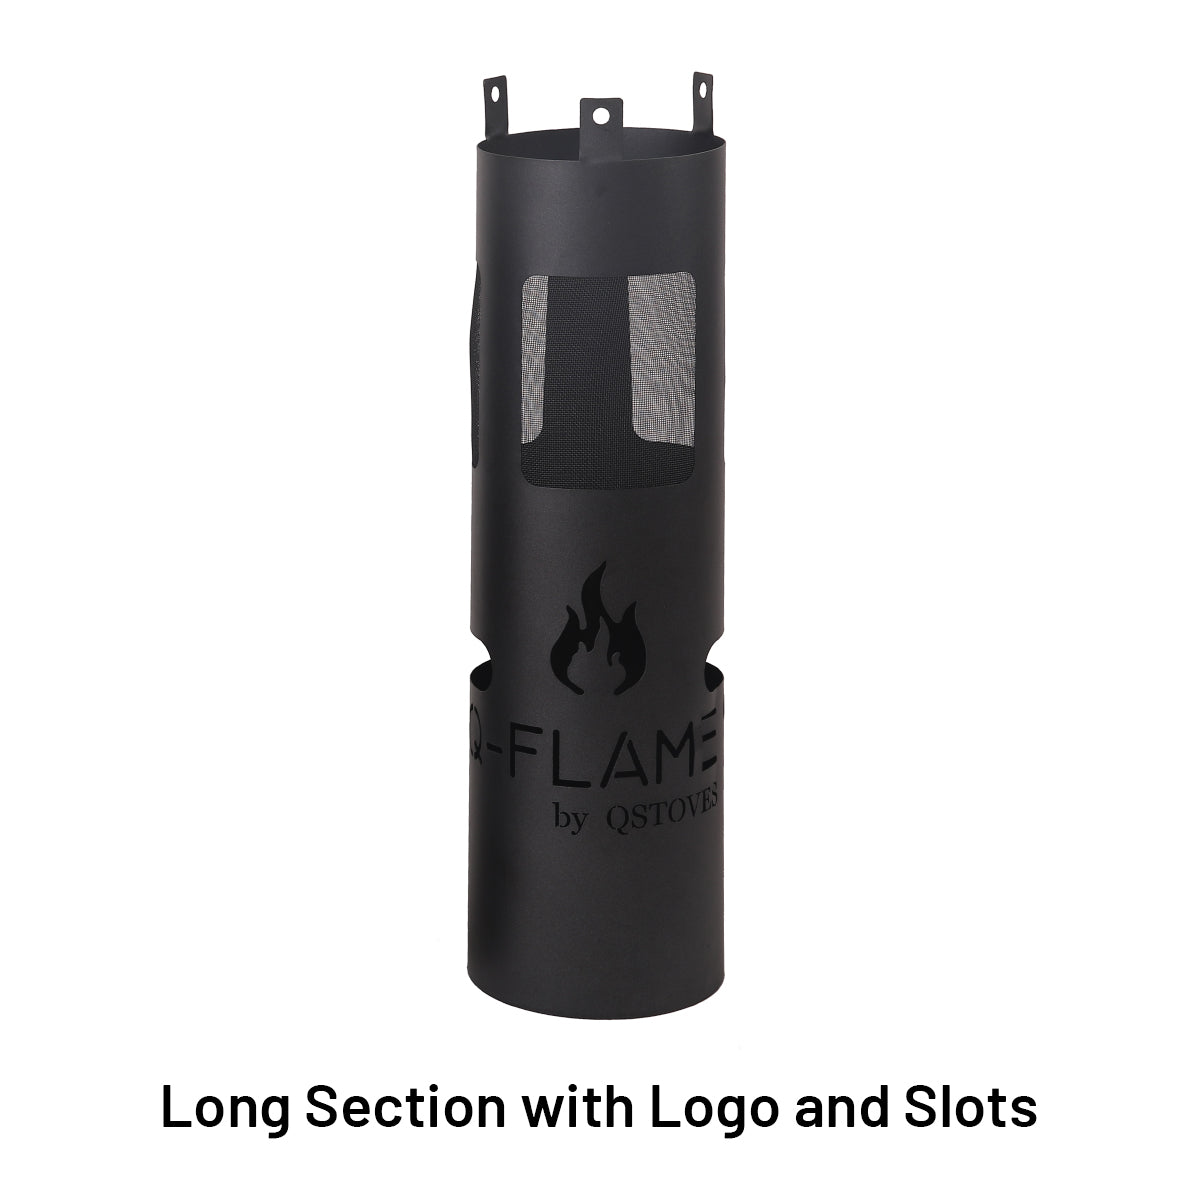 Q-Flame Patio Heater Chimney